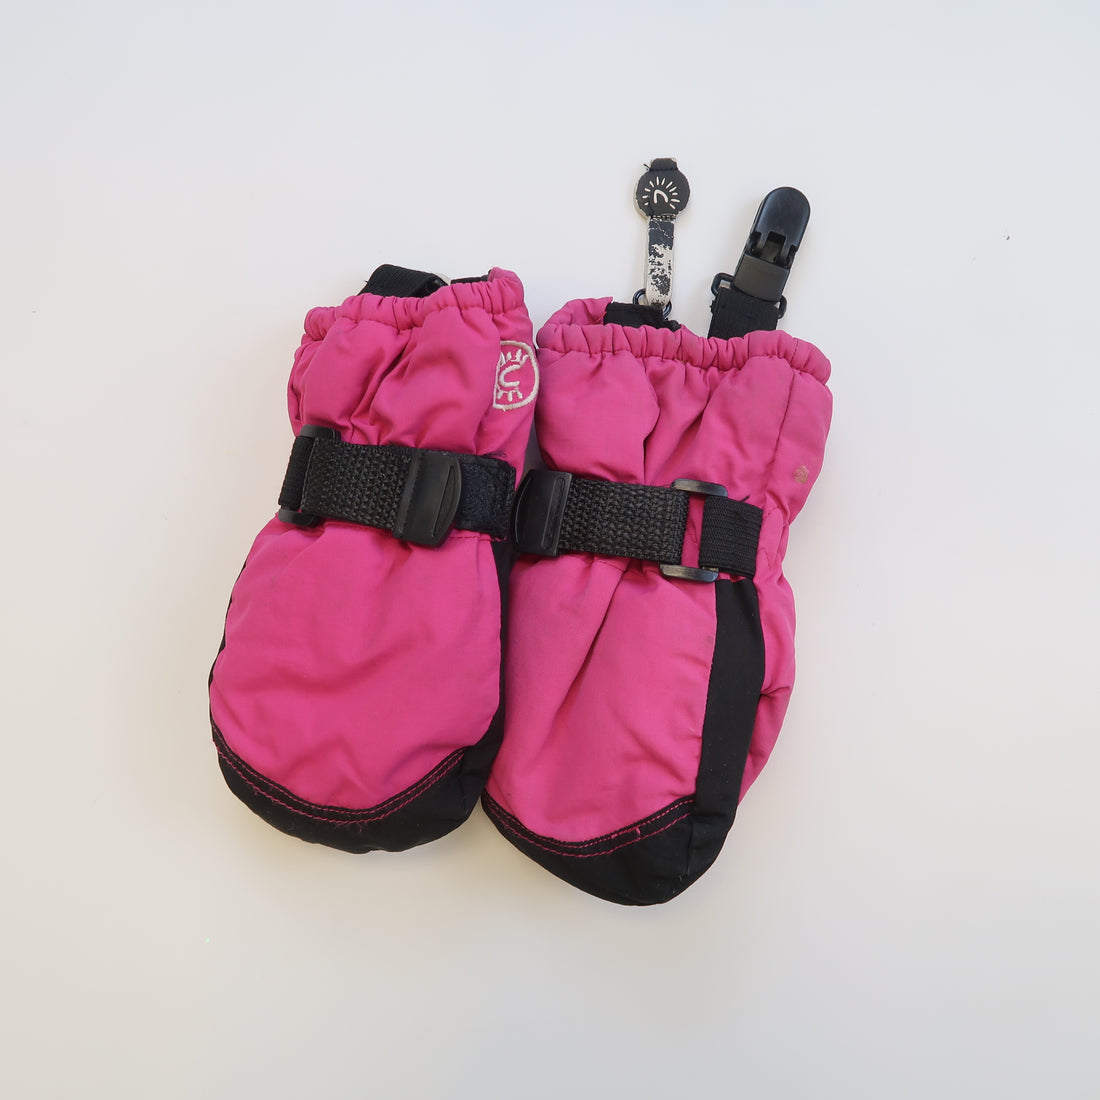 Buy Mid Pink Cosy Fleece Lined Leggings (3mths-7yrs) from Next Canada